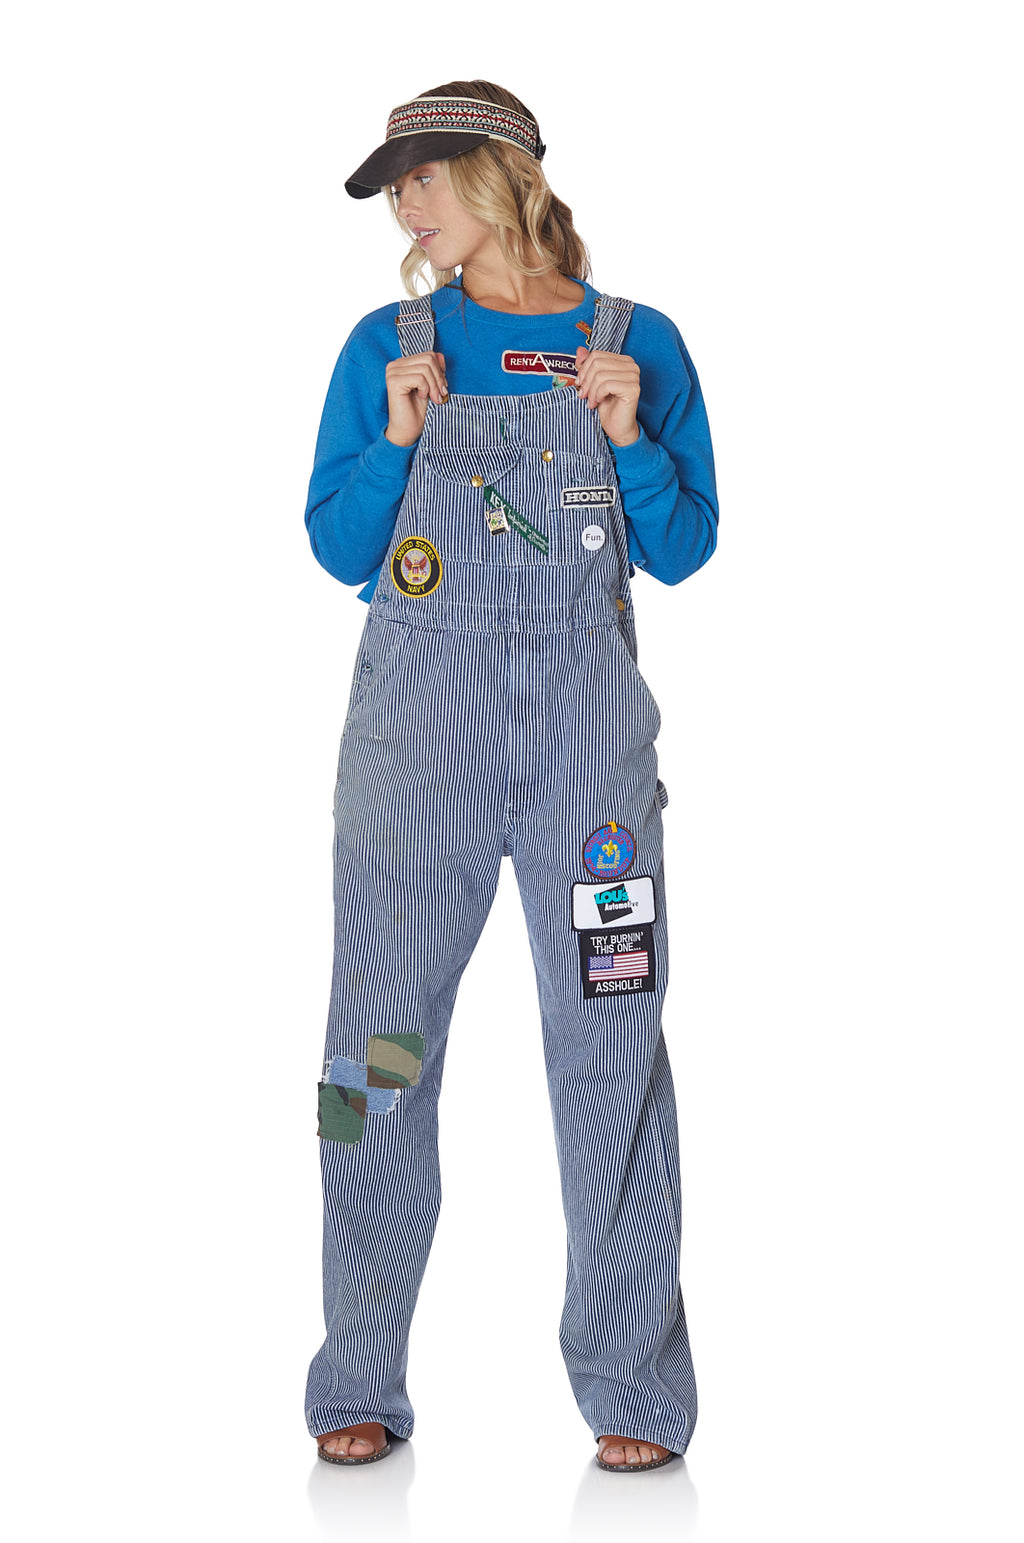 Vintage Conductor Overalls  La shopping, Overalls, Long jumpsuits